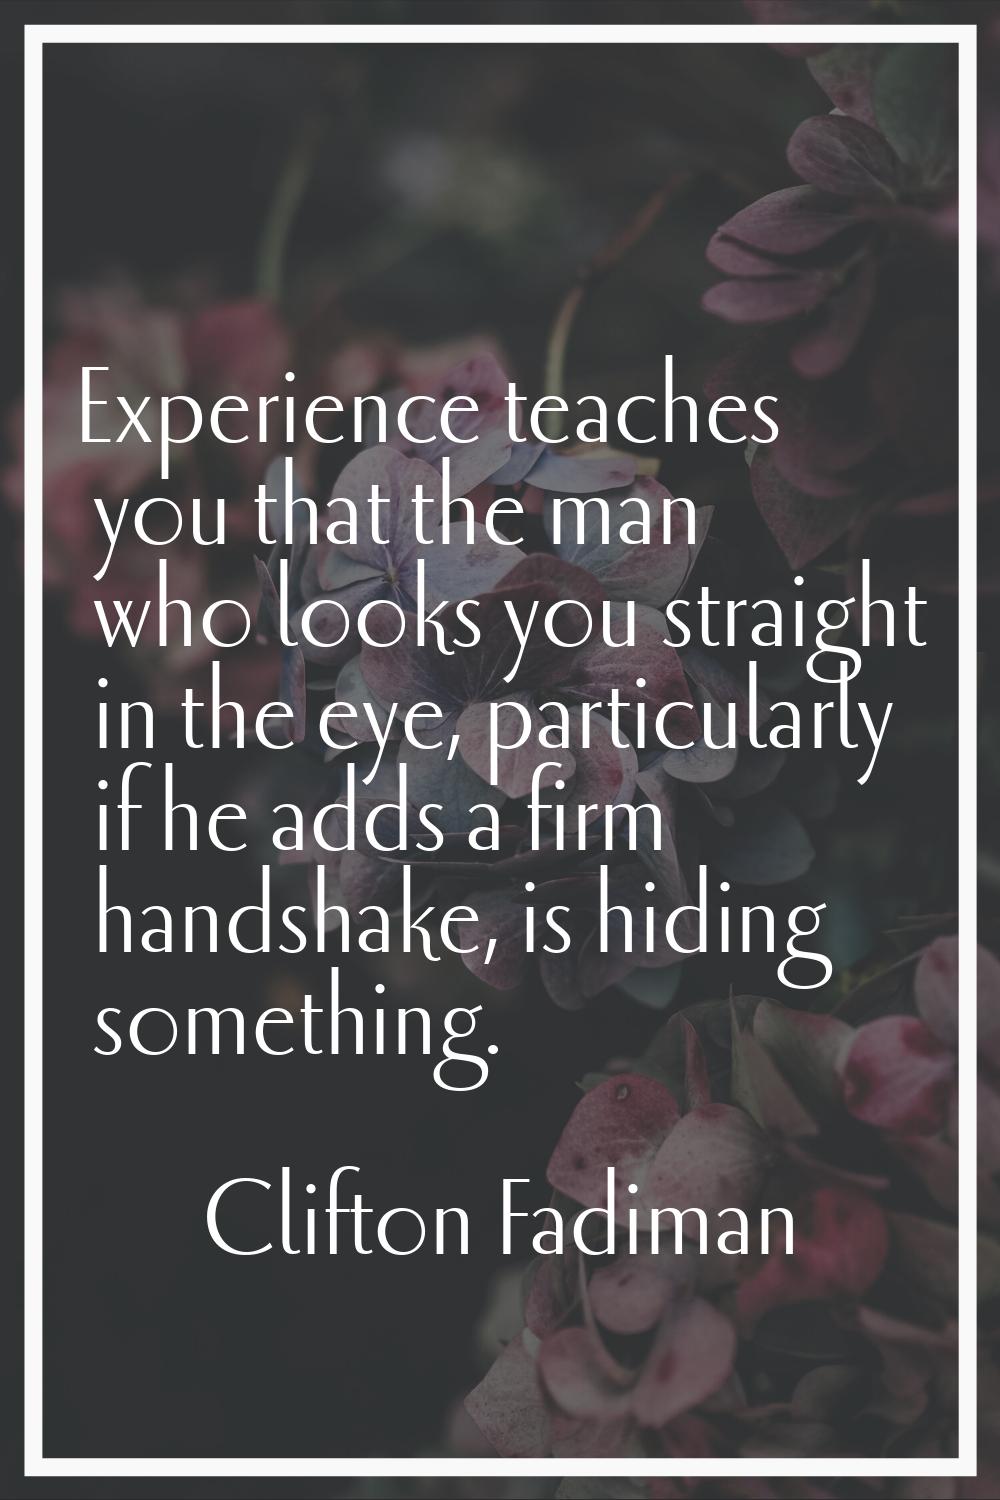 Experience teaches you that the man who looks you straight in the eye, particularly if he adds a fi